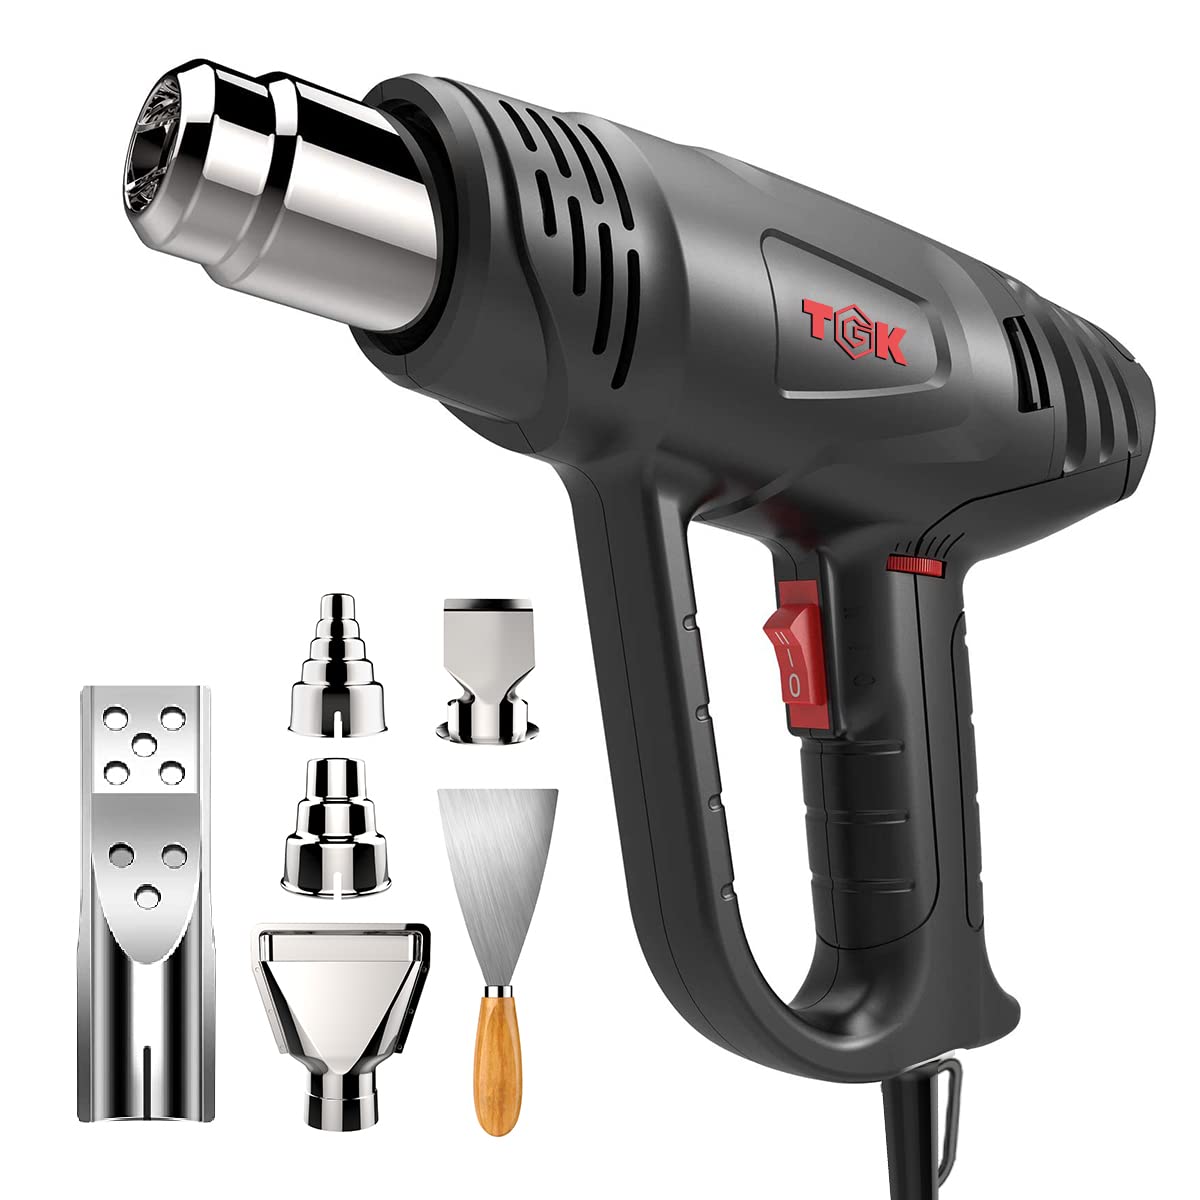 Best quality Hot Air Gun - Heat Gun, TGK 1800W Heavy Duty Hot Air Gun Kit 122℉~1202℉ Dual Temperature Settings with 6 Nozzle Attachments Overload Protection for Crafts, Shrink Wrapping/Tubing, Pai...